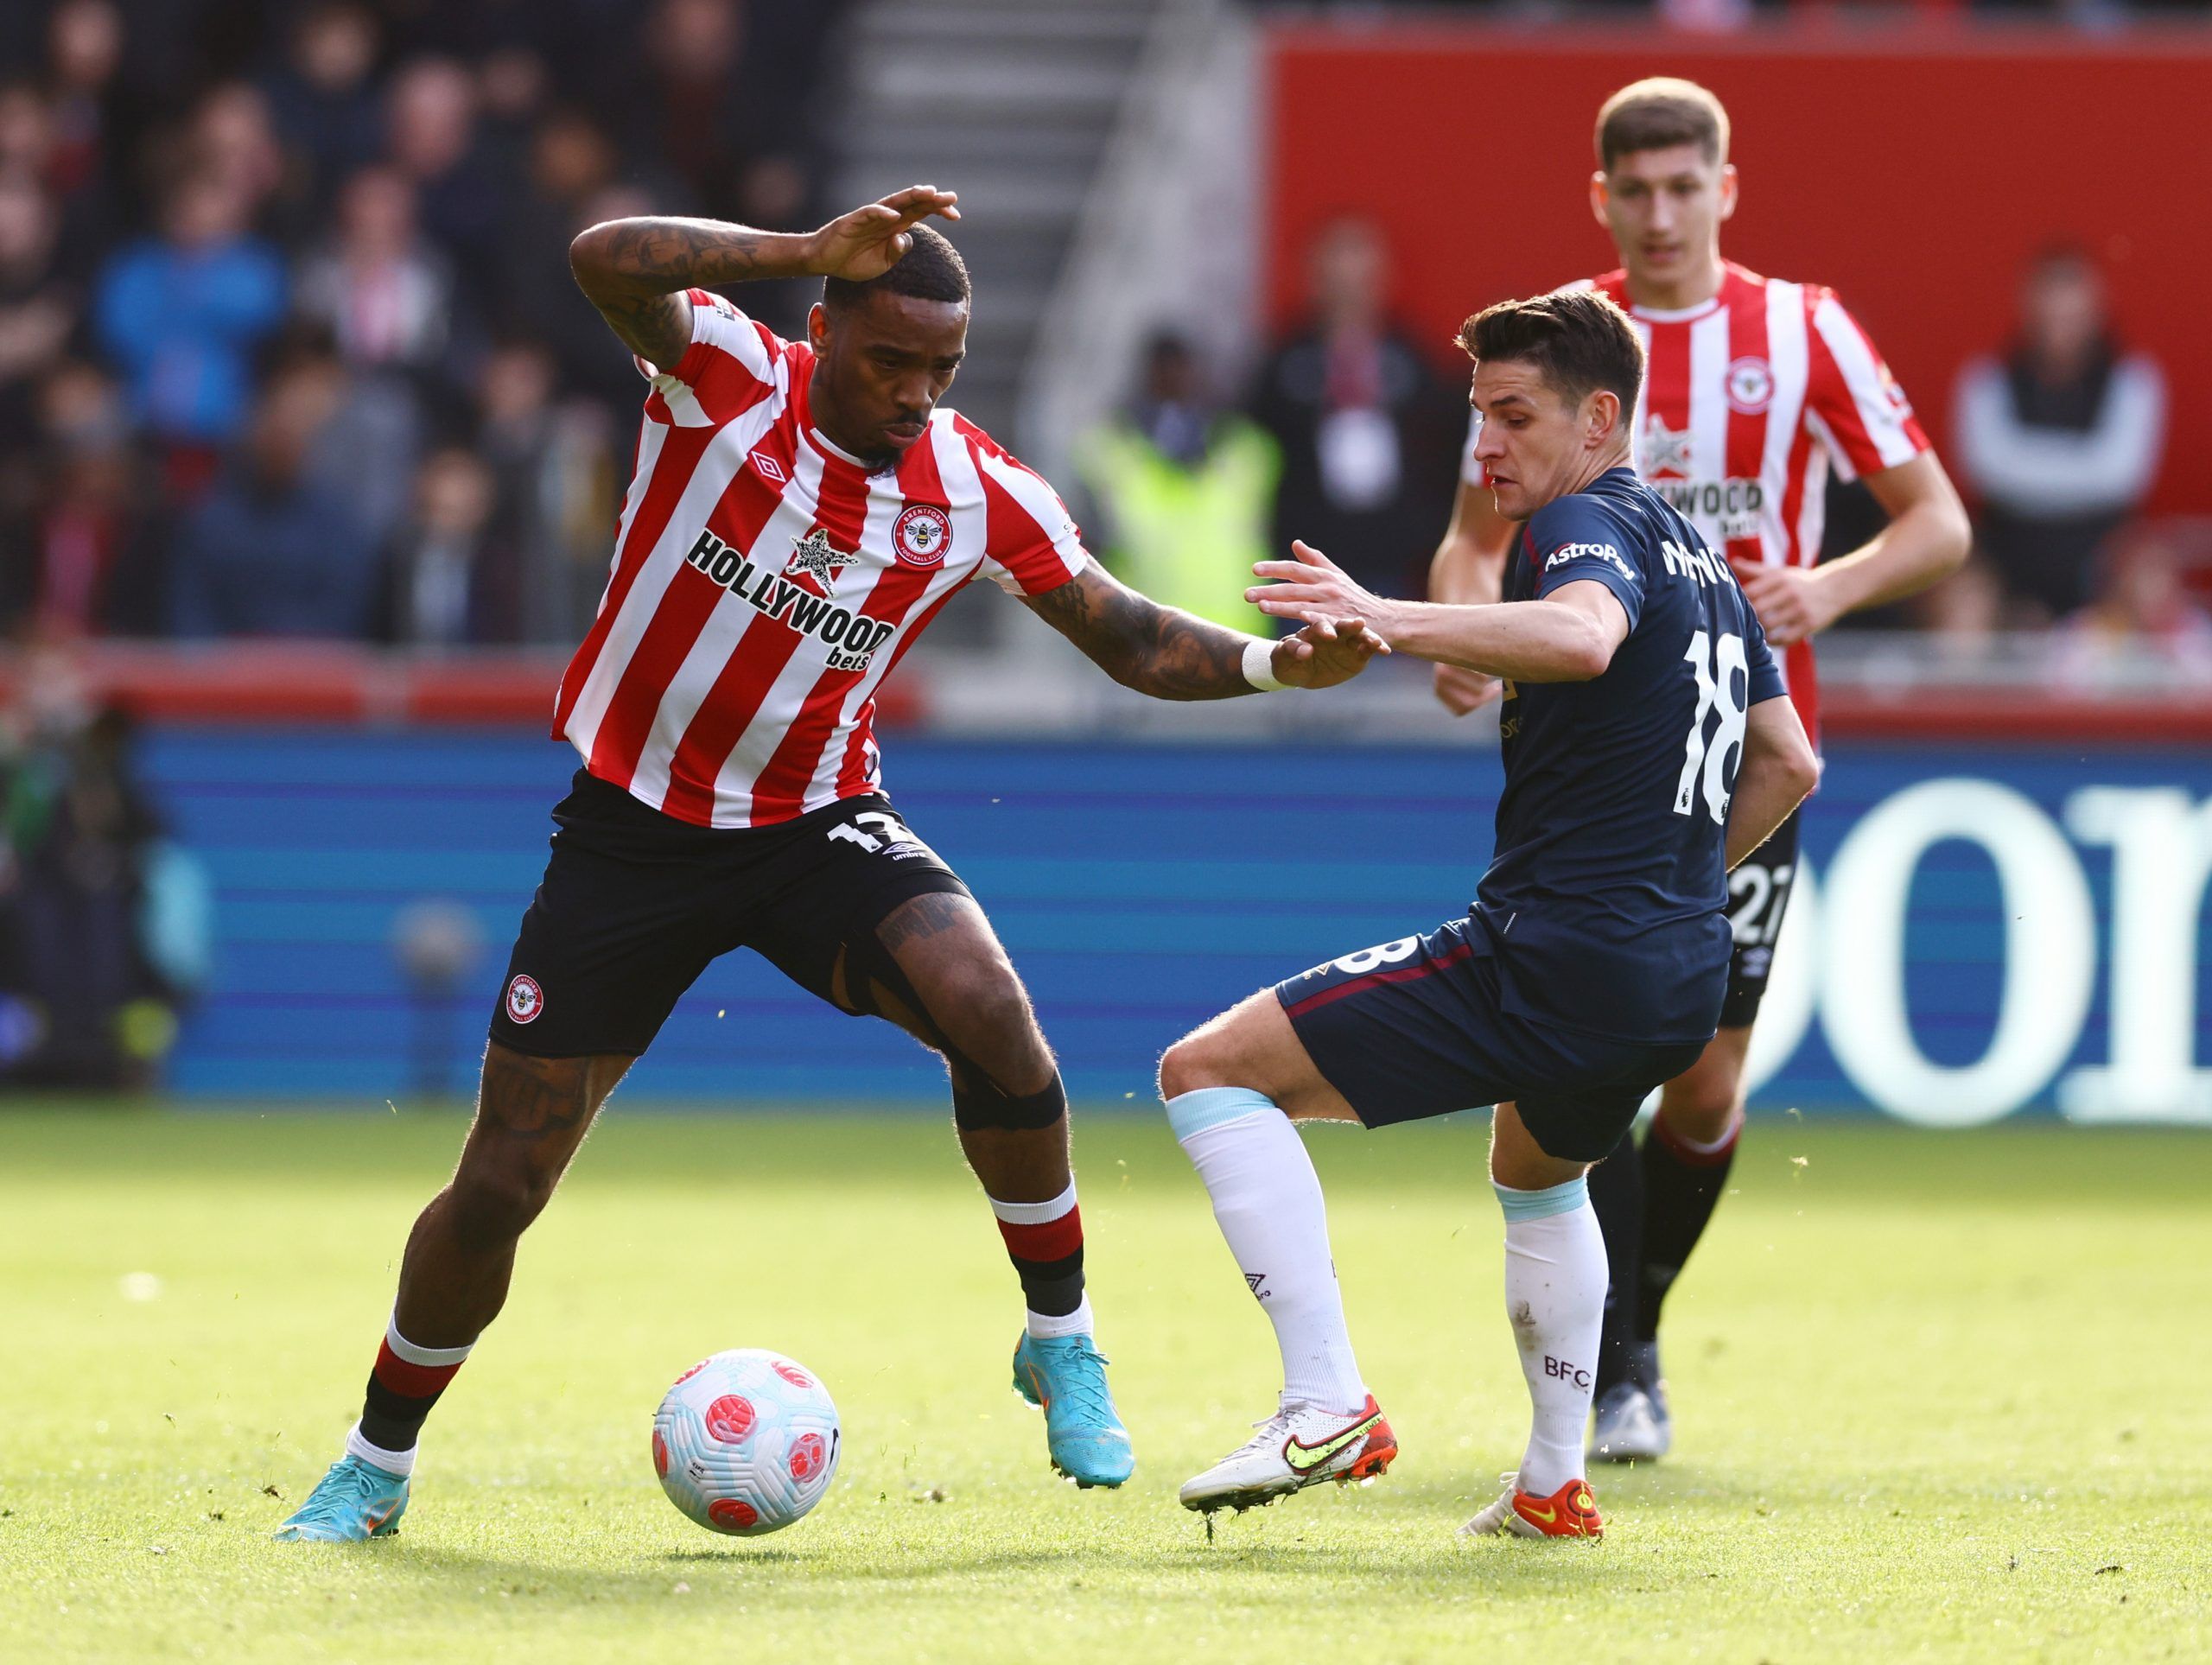 ivan-toney-wolves-brentford-bruno-lage-transfer-news-raul-jimenez-trincao-neves-moutinho-dendoncker-latest-newsSoccer Football - Premier League - Brentford v Burnley - Brentford Community Stadium, London, Britain - March 12, 2022 Brentford's Ivan Toney in action with Burnley's Ashley Westwood REUTERS/David Klein EDITORIAL USE ONLY. No use with unauthorized audio, video, data, fixture lists, club/league logos or 'live' services. Online in-match use limited to 75 images, no video emulation. No use